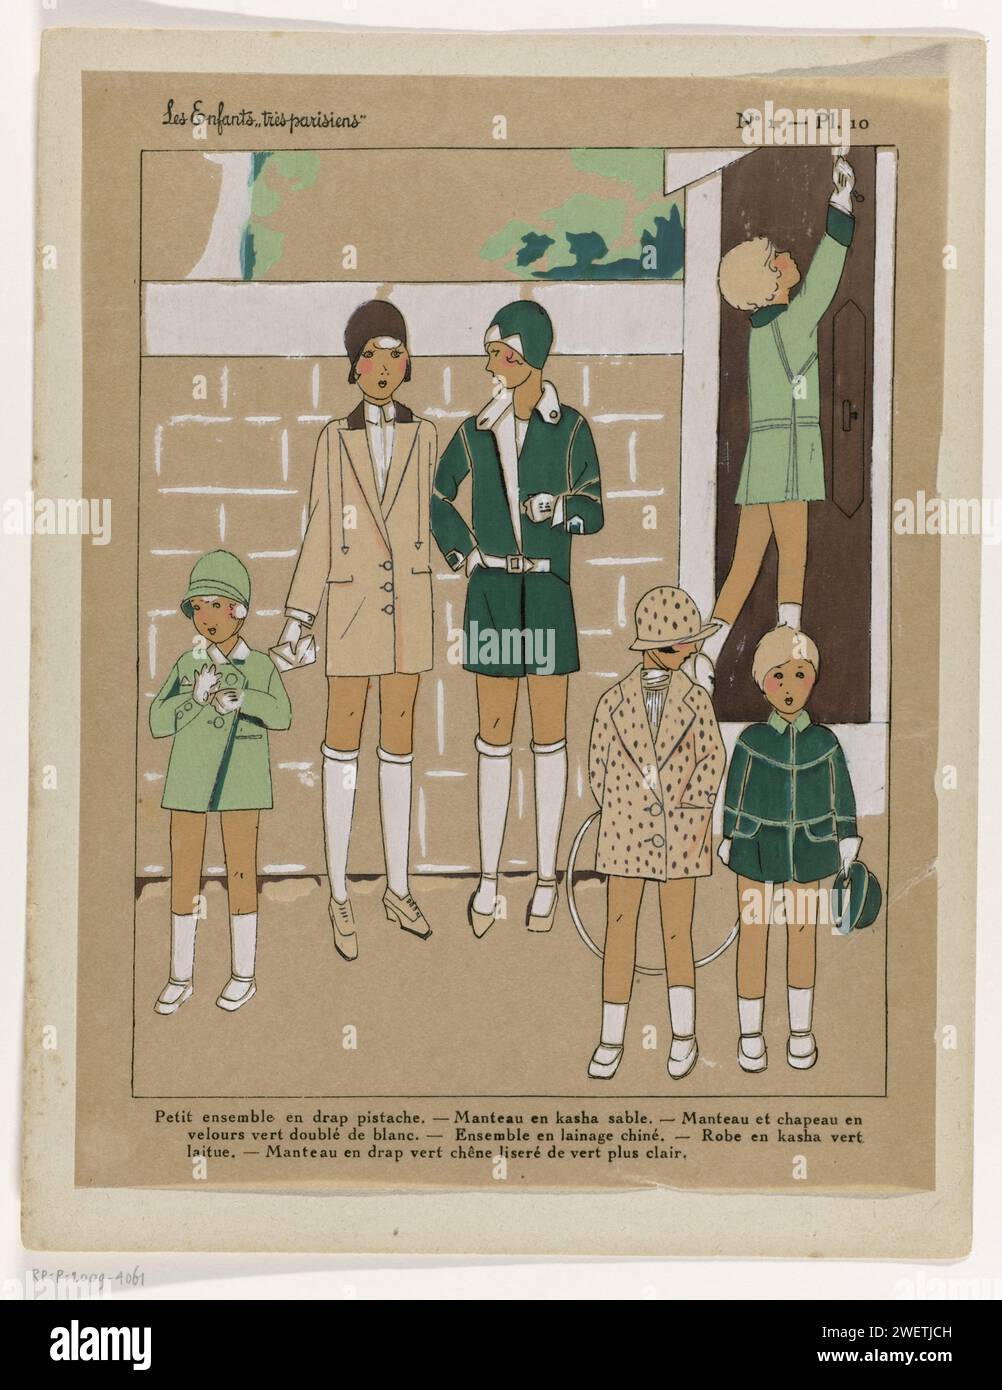 Very Parisian' children, CA. 1927, No. 1, pl. 10: Small set in pistachy sheet (...), c. 1927  Children's clothing. Ensemble of pistachio -colored sheet. Mantel of 'Kasha Sable'. Mantel and hat of green velvet lined with white. Ensemble of 'Lainage Chiné'. Green Kasha dress. Mantel of green sheet with a light green piping. Print from the fashion magazine Très Parisien (1920-1936).  paper letterpress printing fashion plates. dress, gown (+ girls' clothes). coat (+ girls' clothes). letter, envelope. (bowling a) hoop Stock Photo